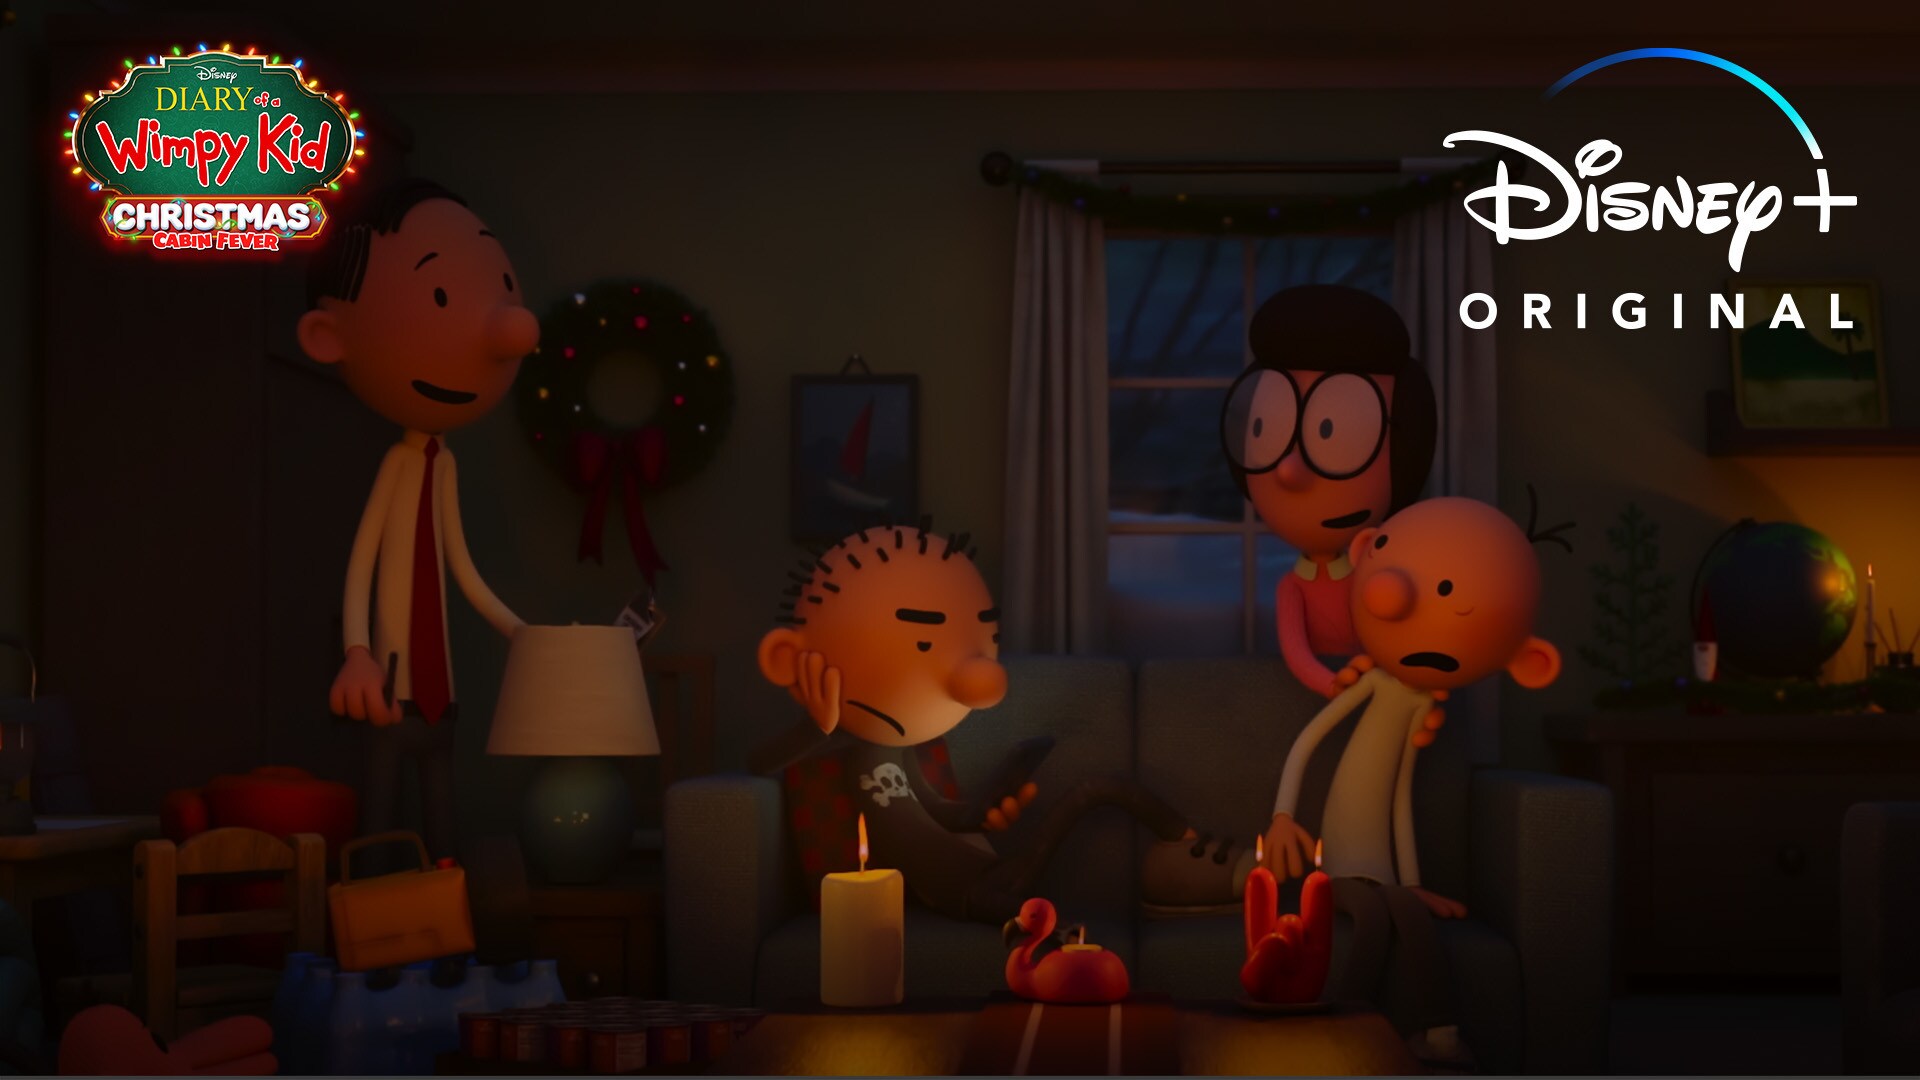 Diary of a Wimpy Kid Christmas: Cabin Fever | 3 days later... | Disney+